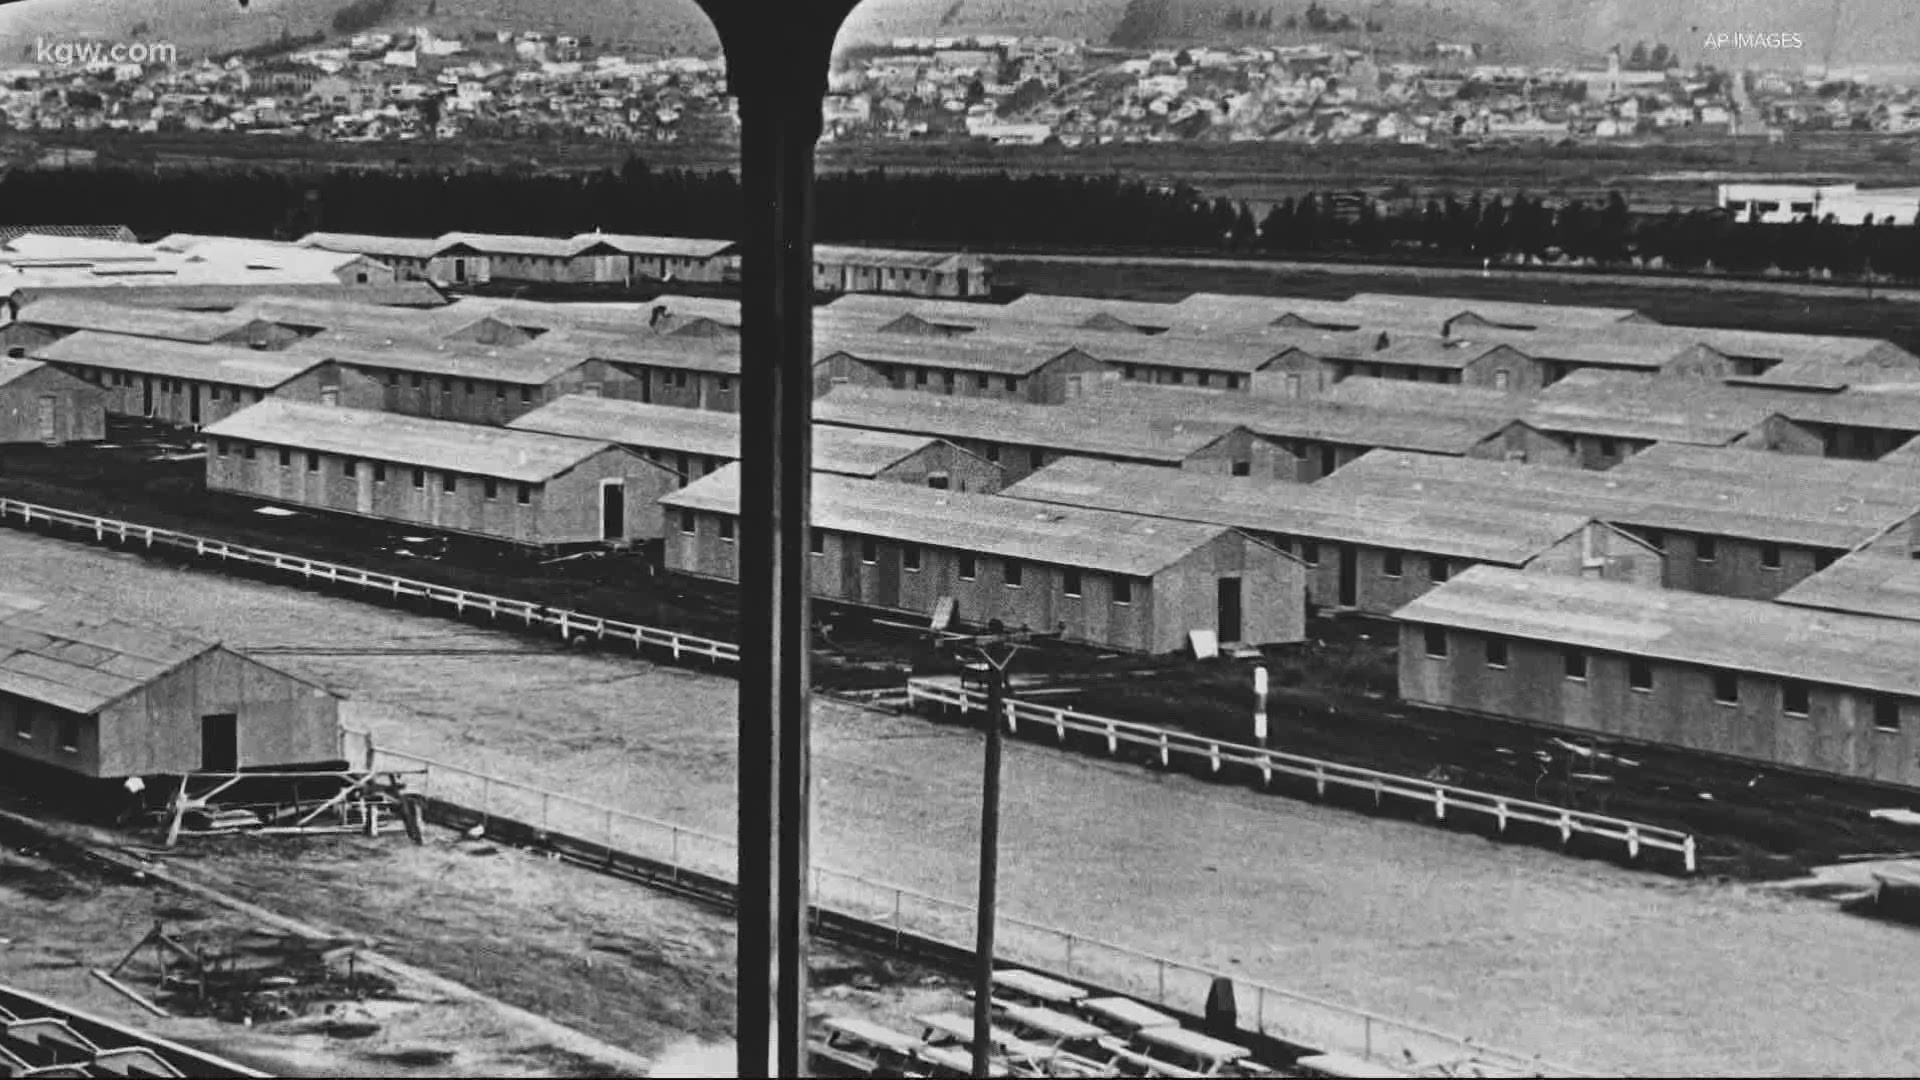 A reminder of a very dark, horrific piece of local history: the U.S. internment of Japanese Americans.